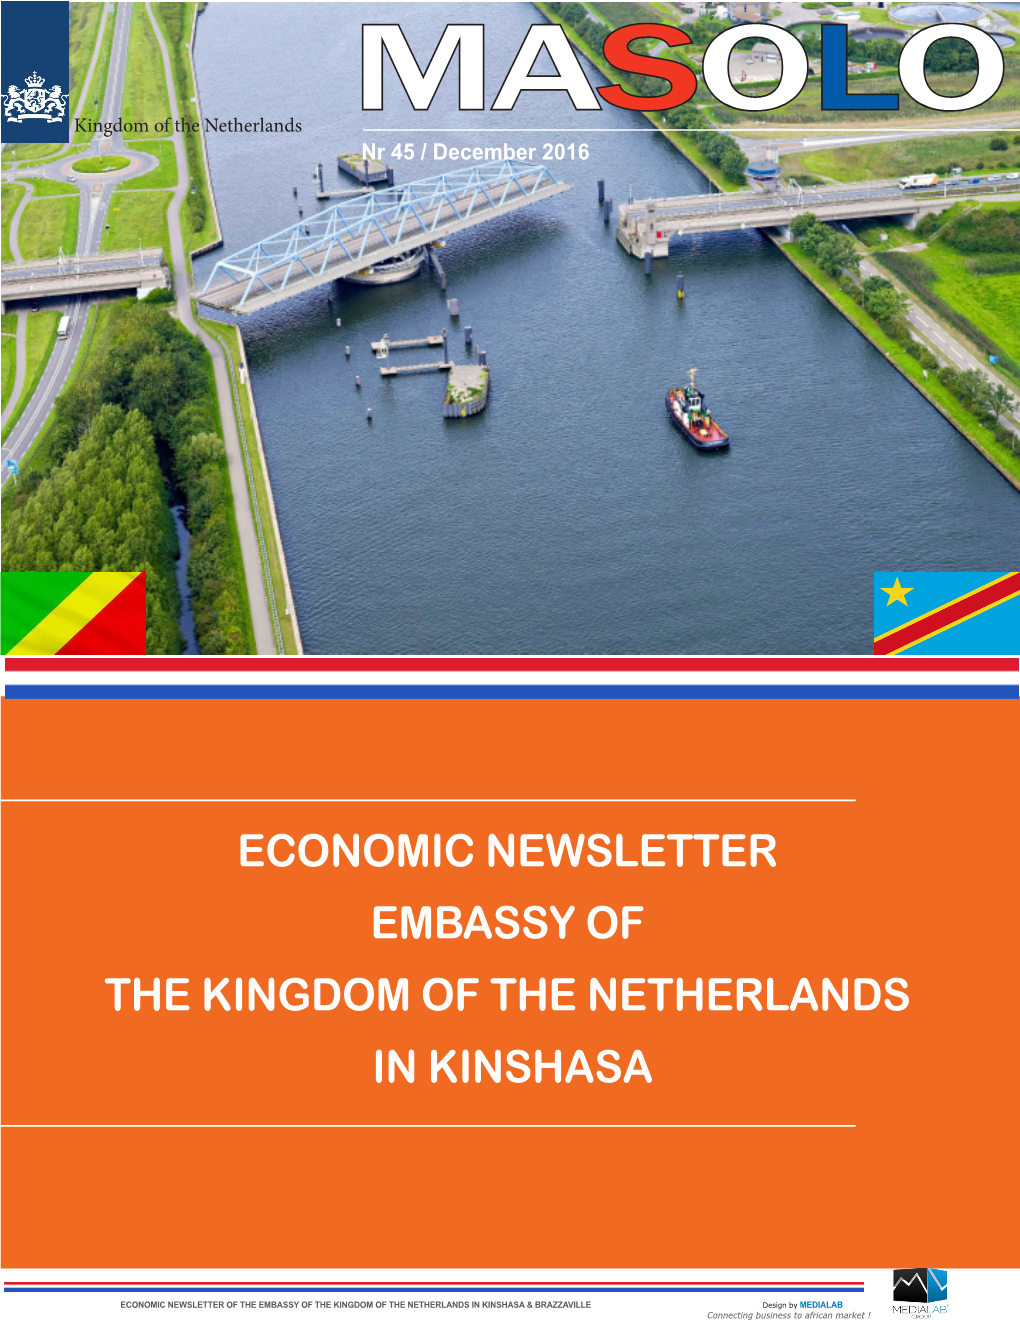 Economic Newsletter Embassy of the Kingdom of the Netherlands in Kinshasa